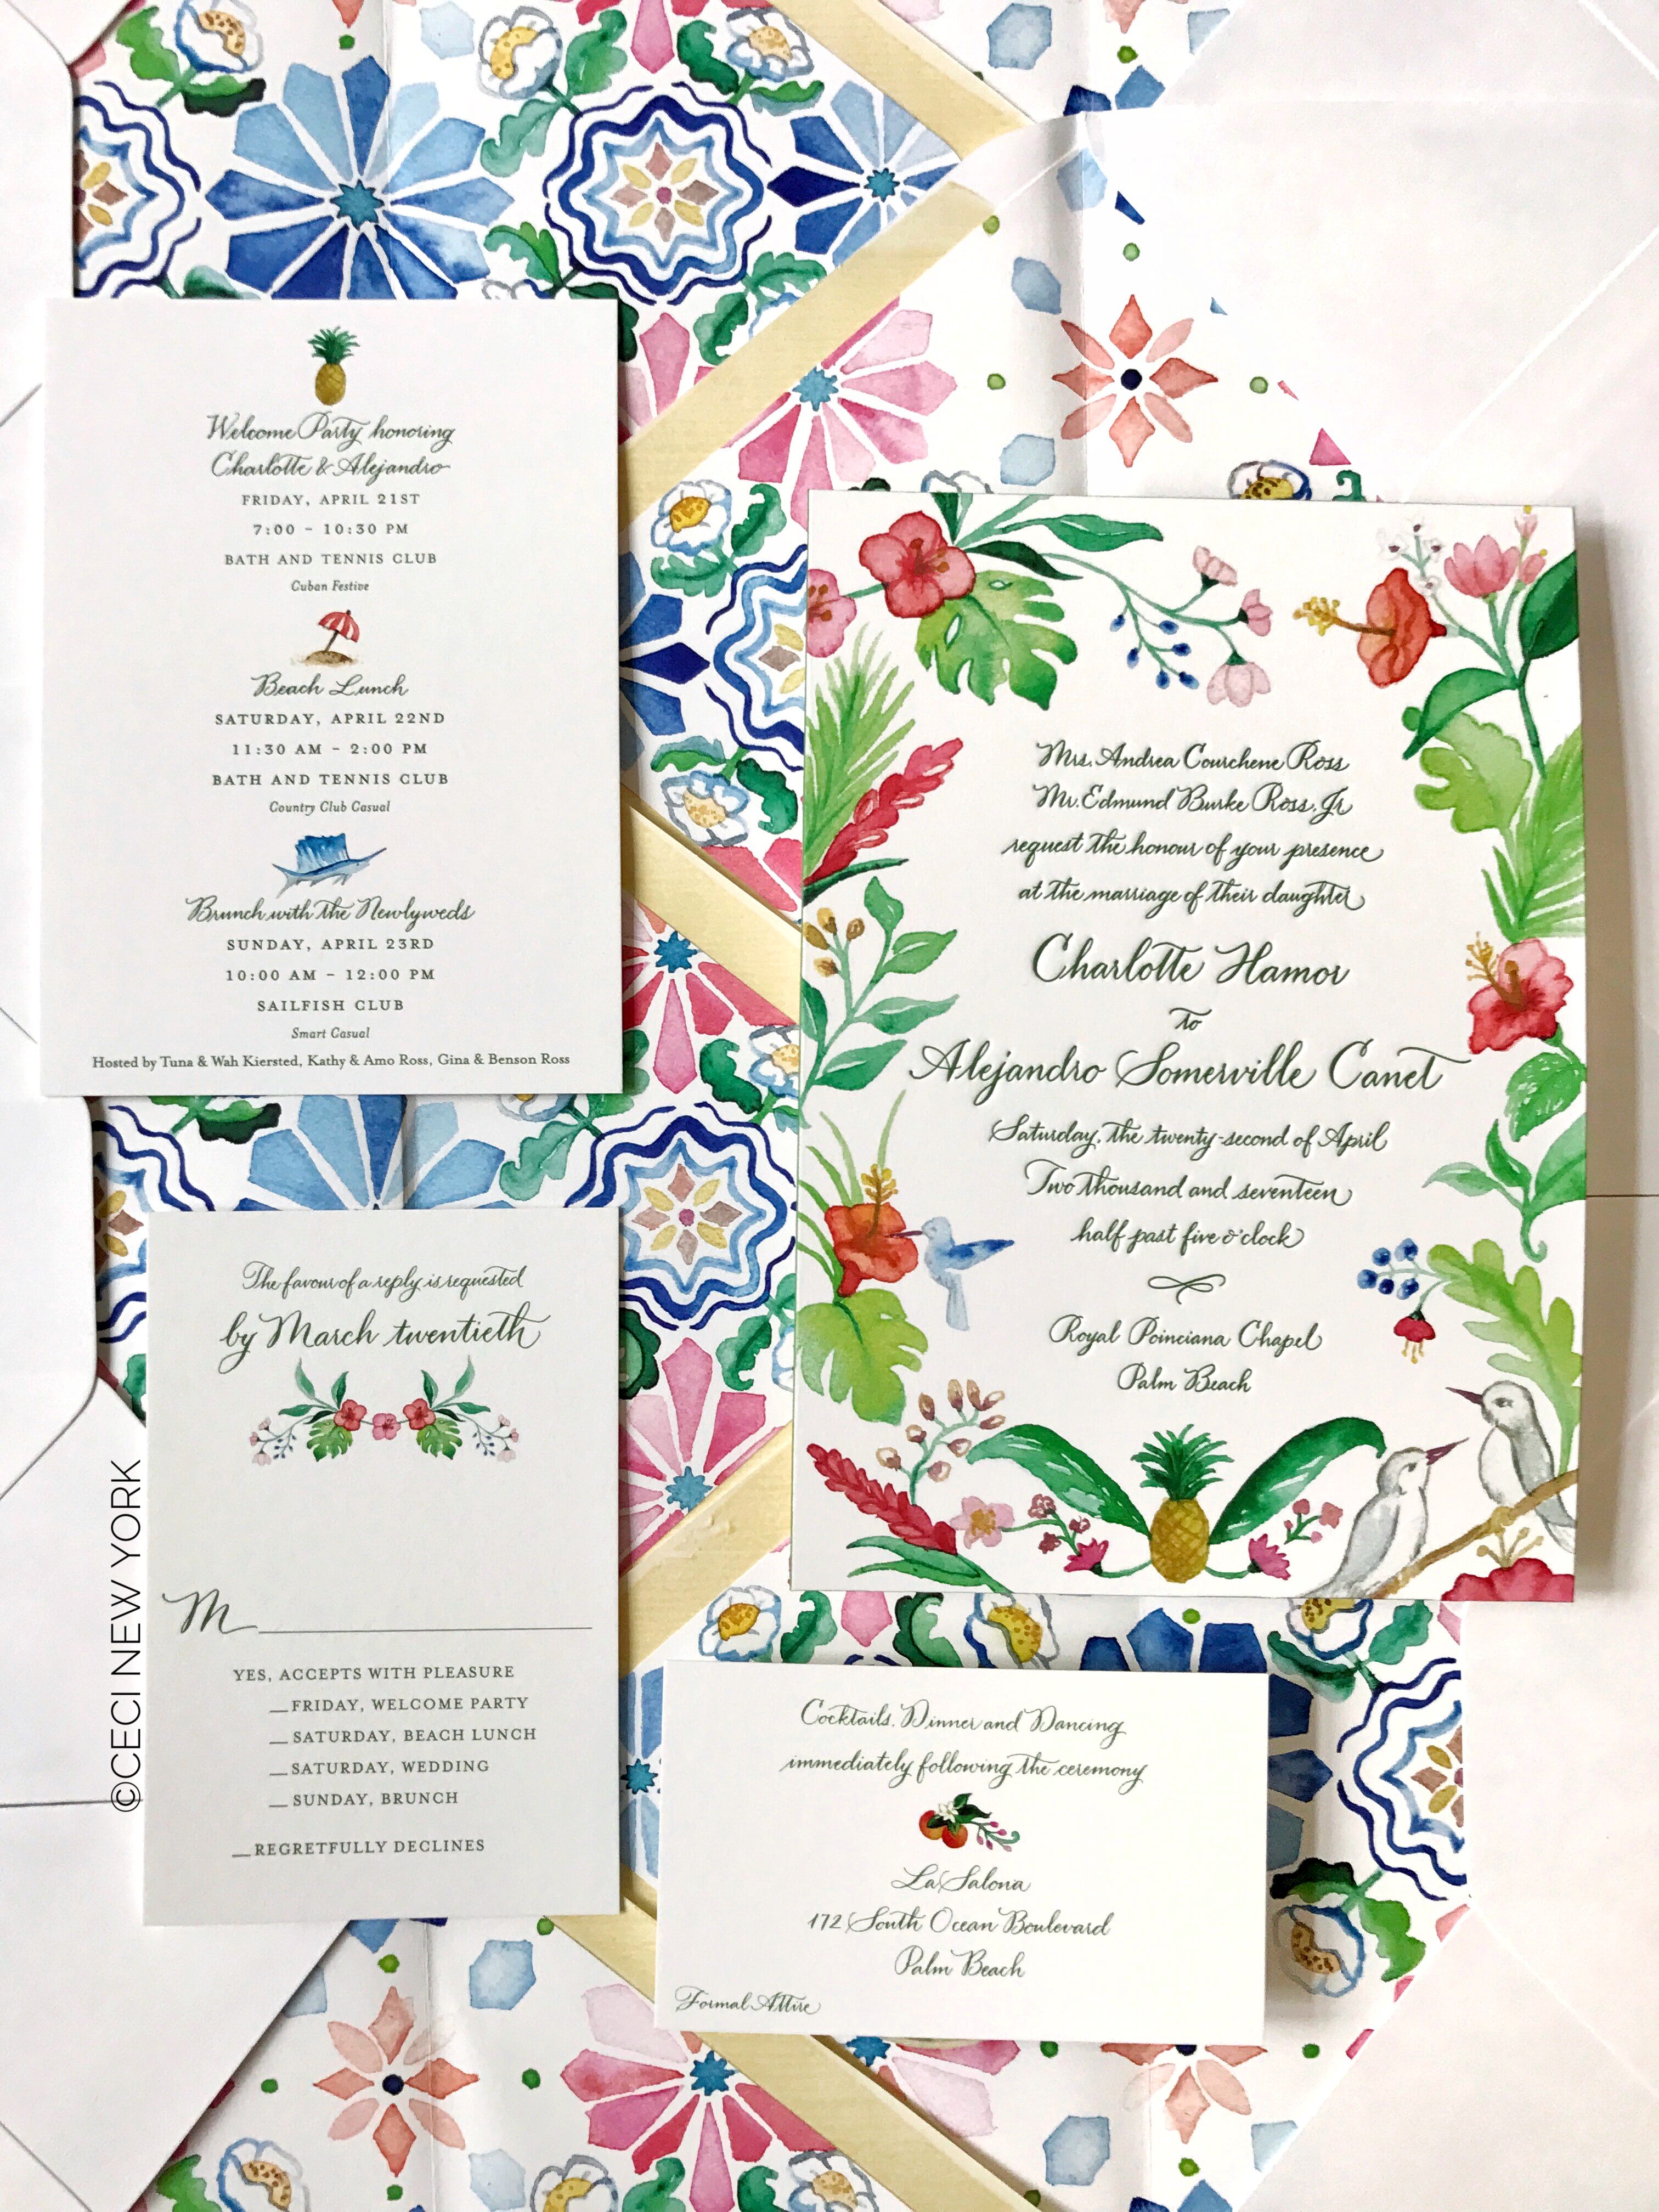 Invitations Paper In New York Ny The Knot